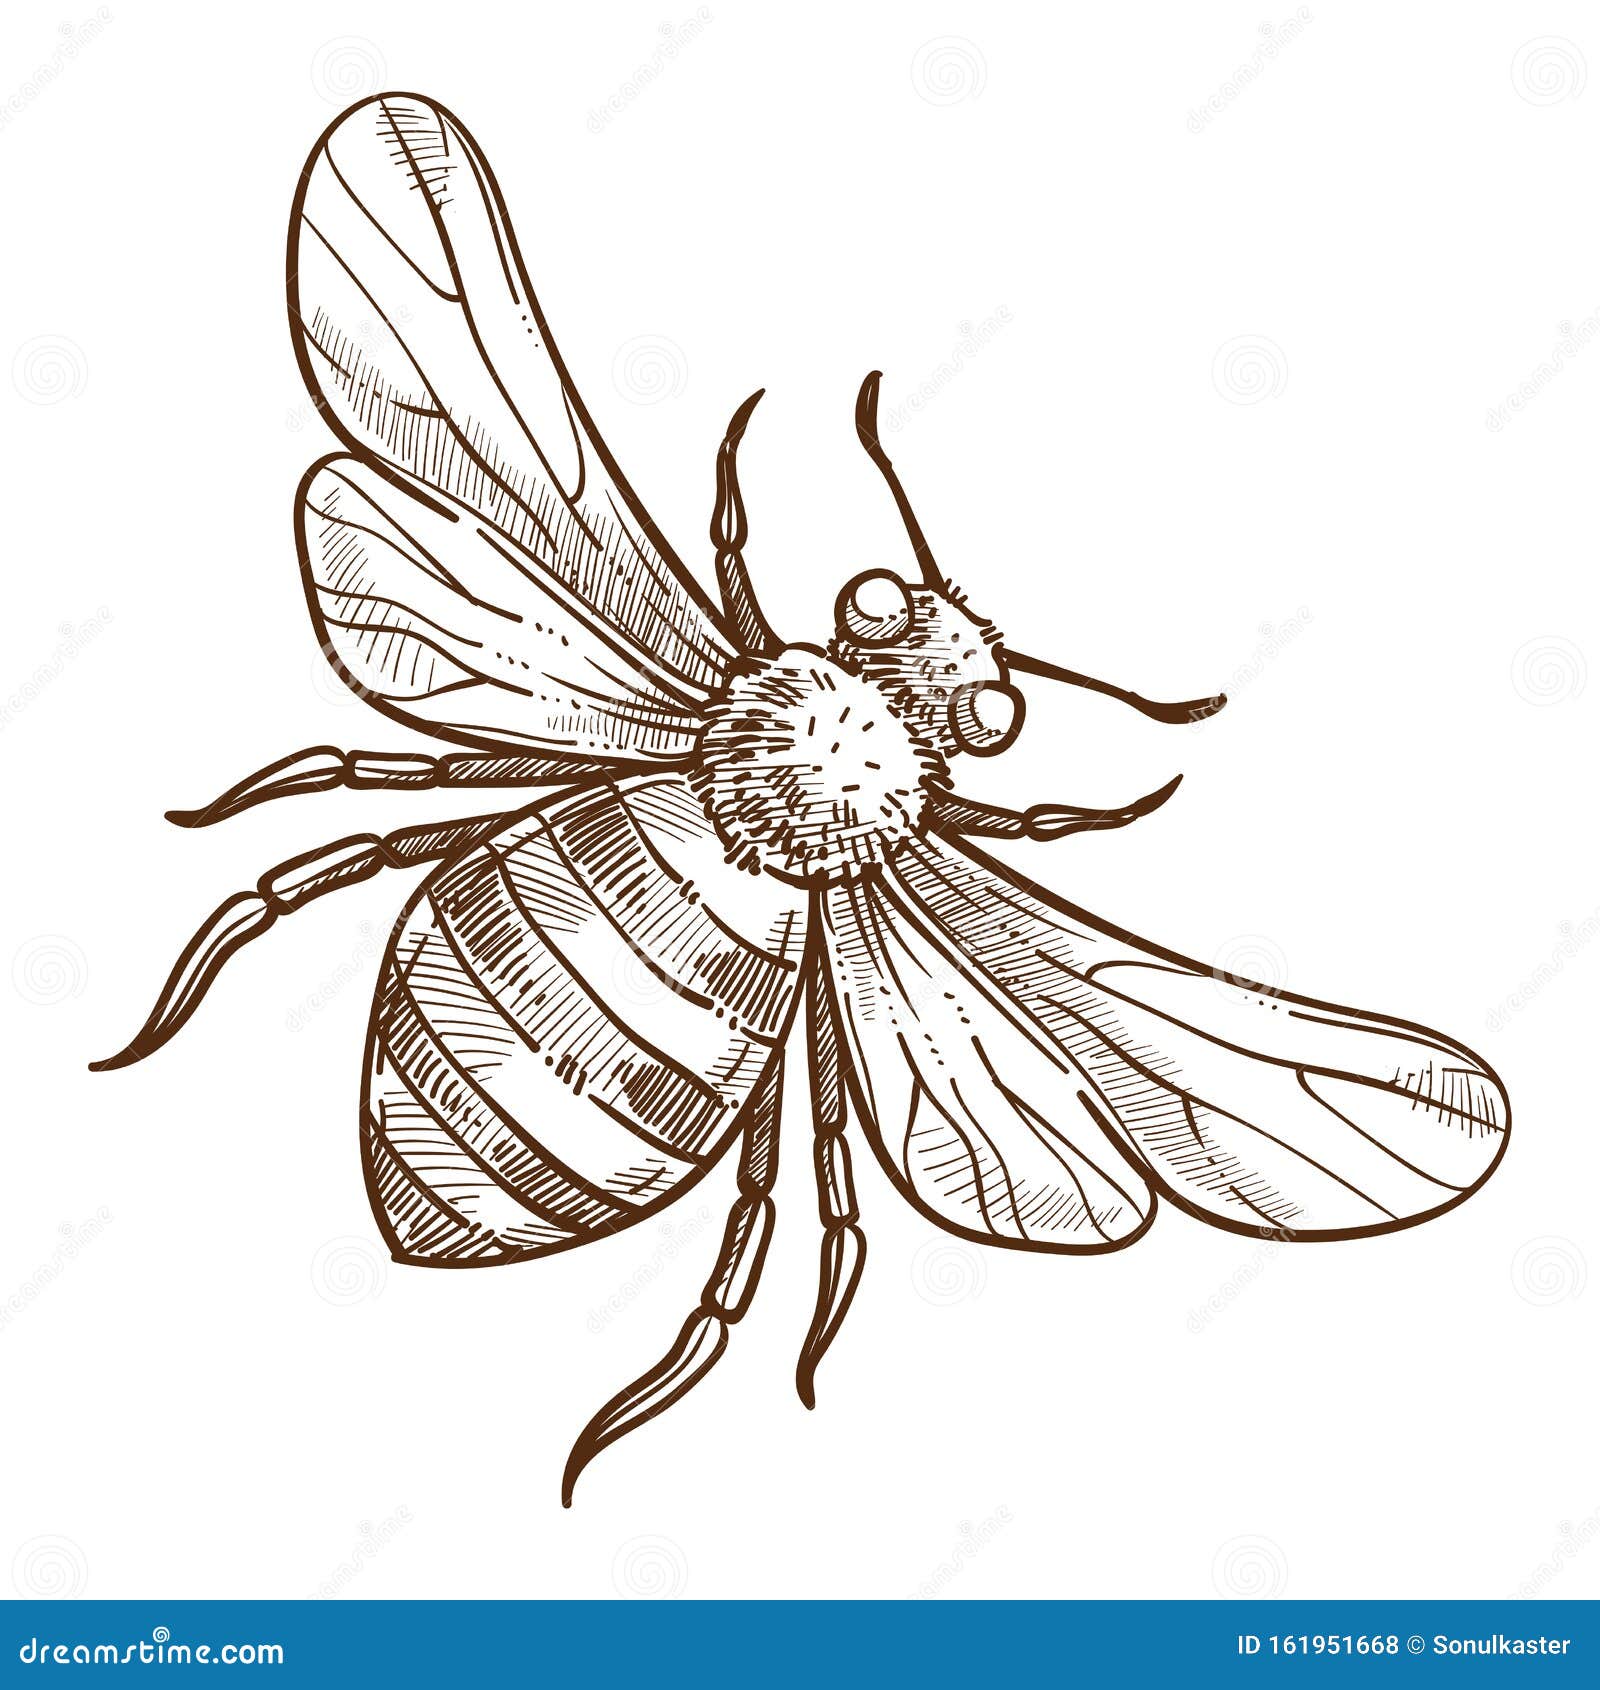 Lady Bug Sketch Vector Images over 270